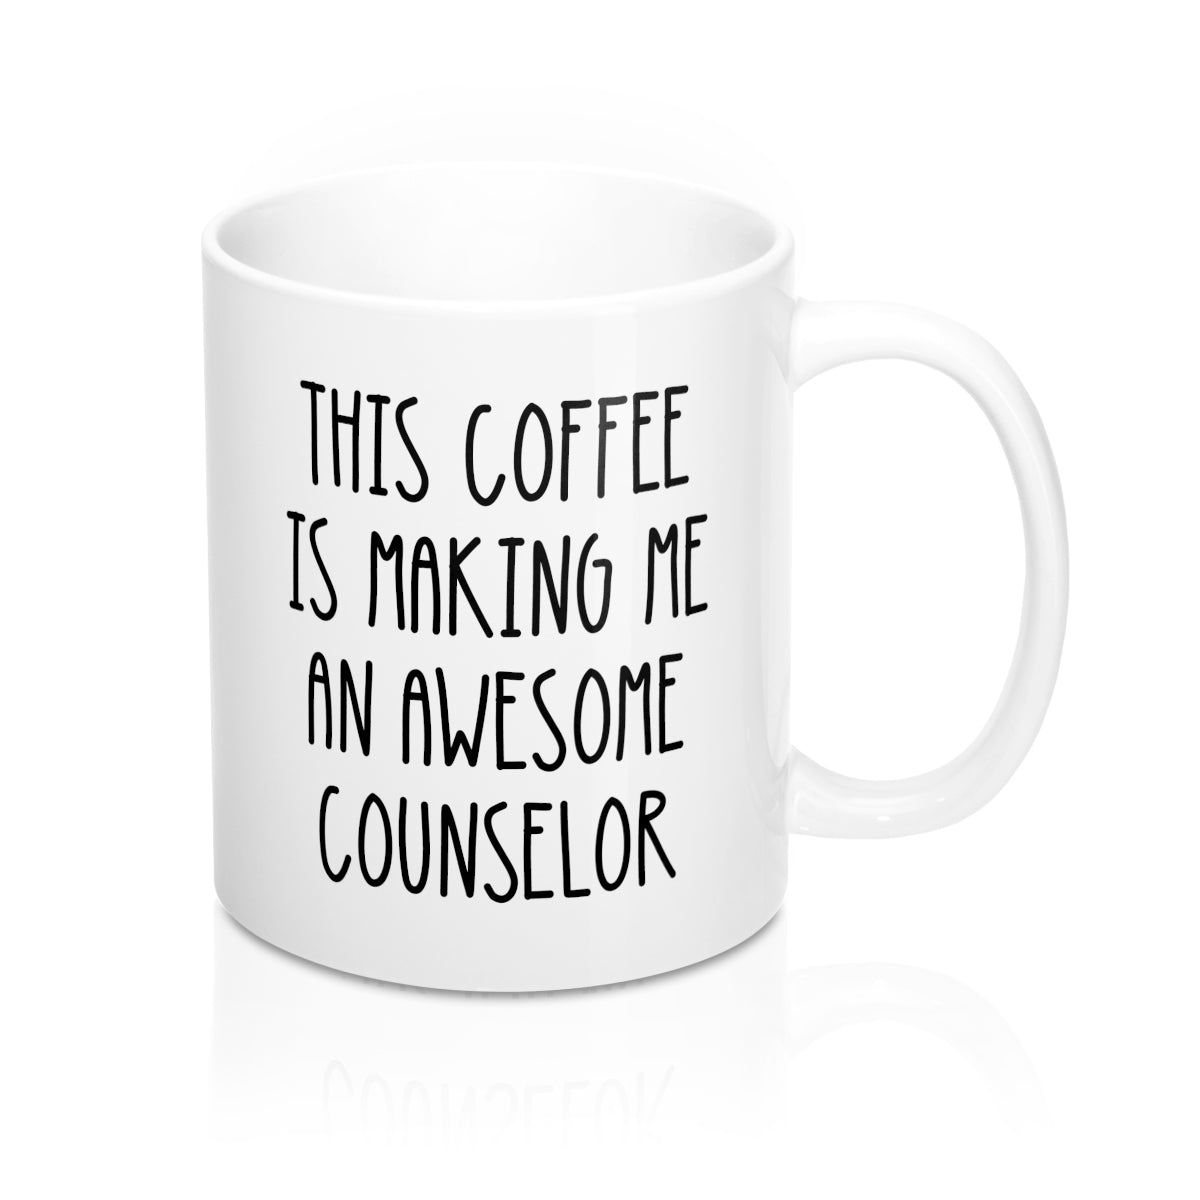 This Coffee Is Making Me An Awesome Counselor Mug